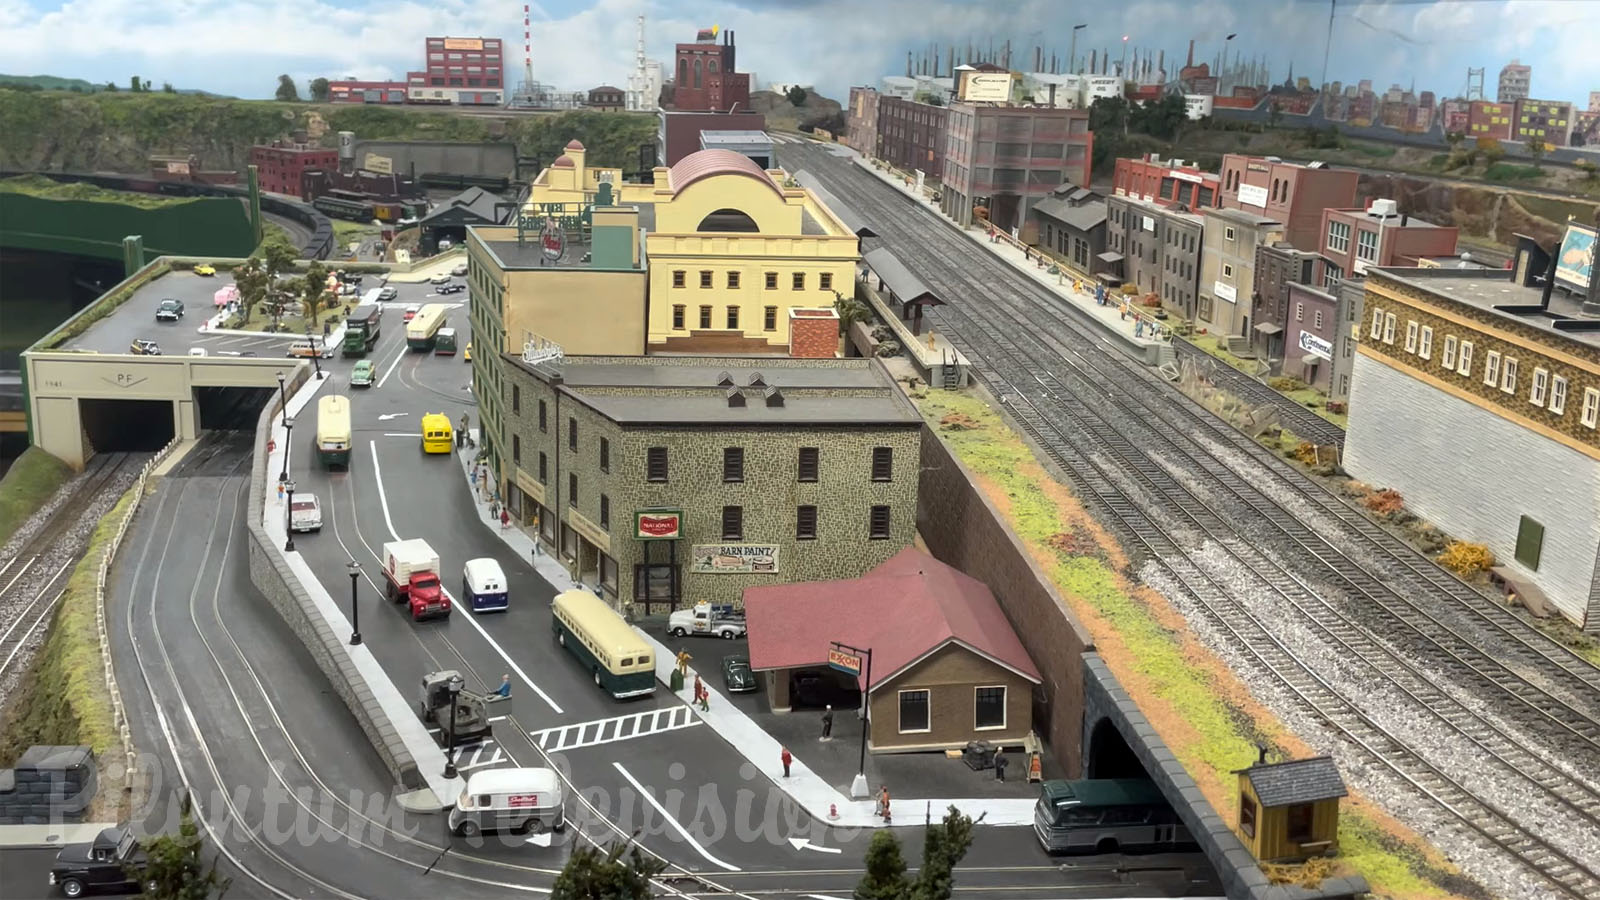 One of America’s largest HO scale model train layouts - The Chelten Hills Model Railroad Club